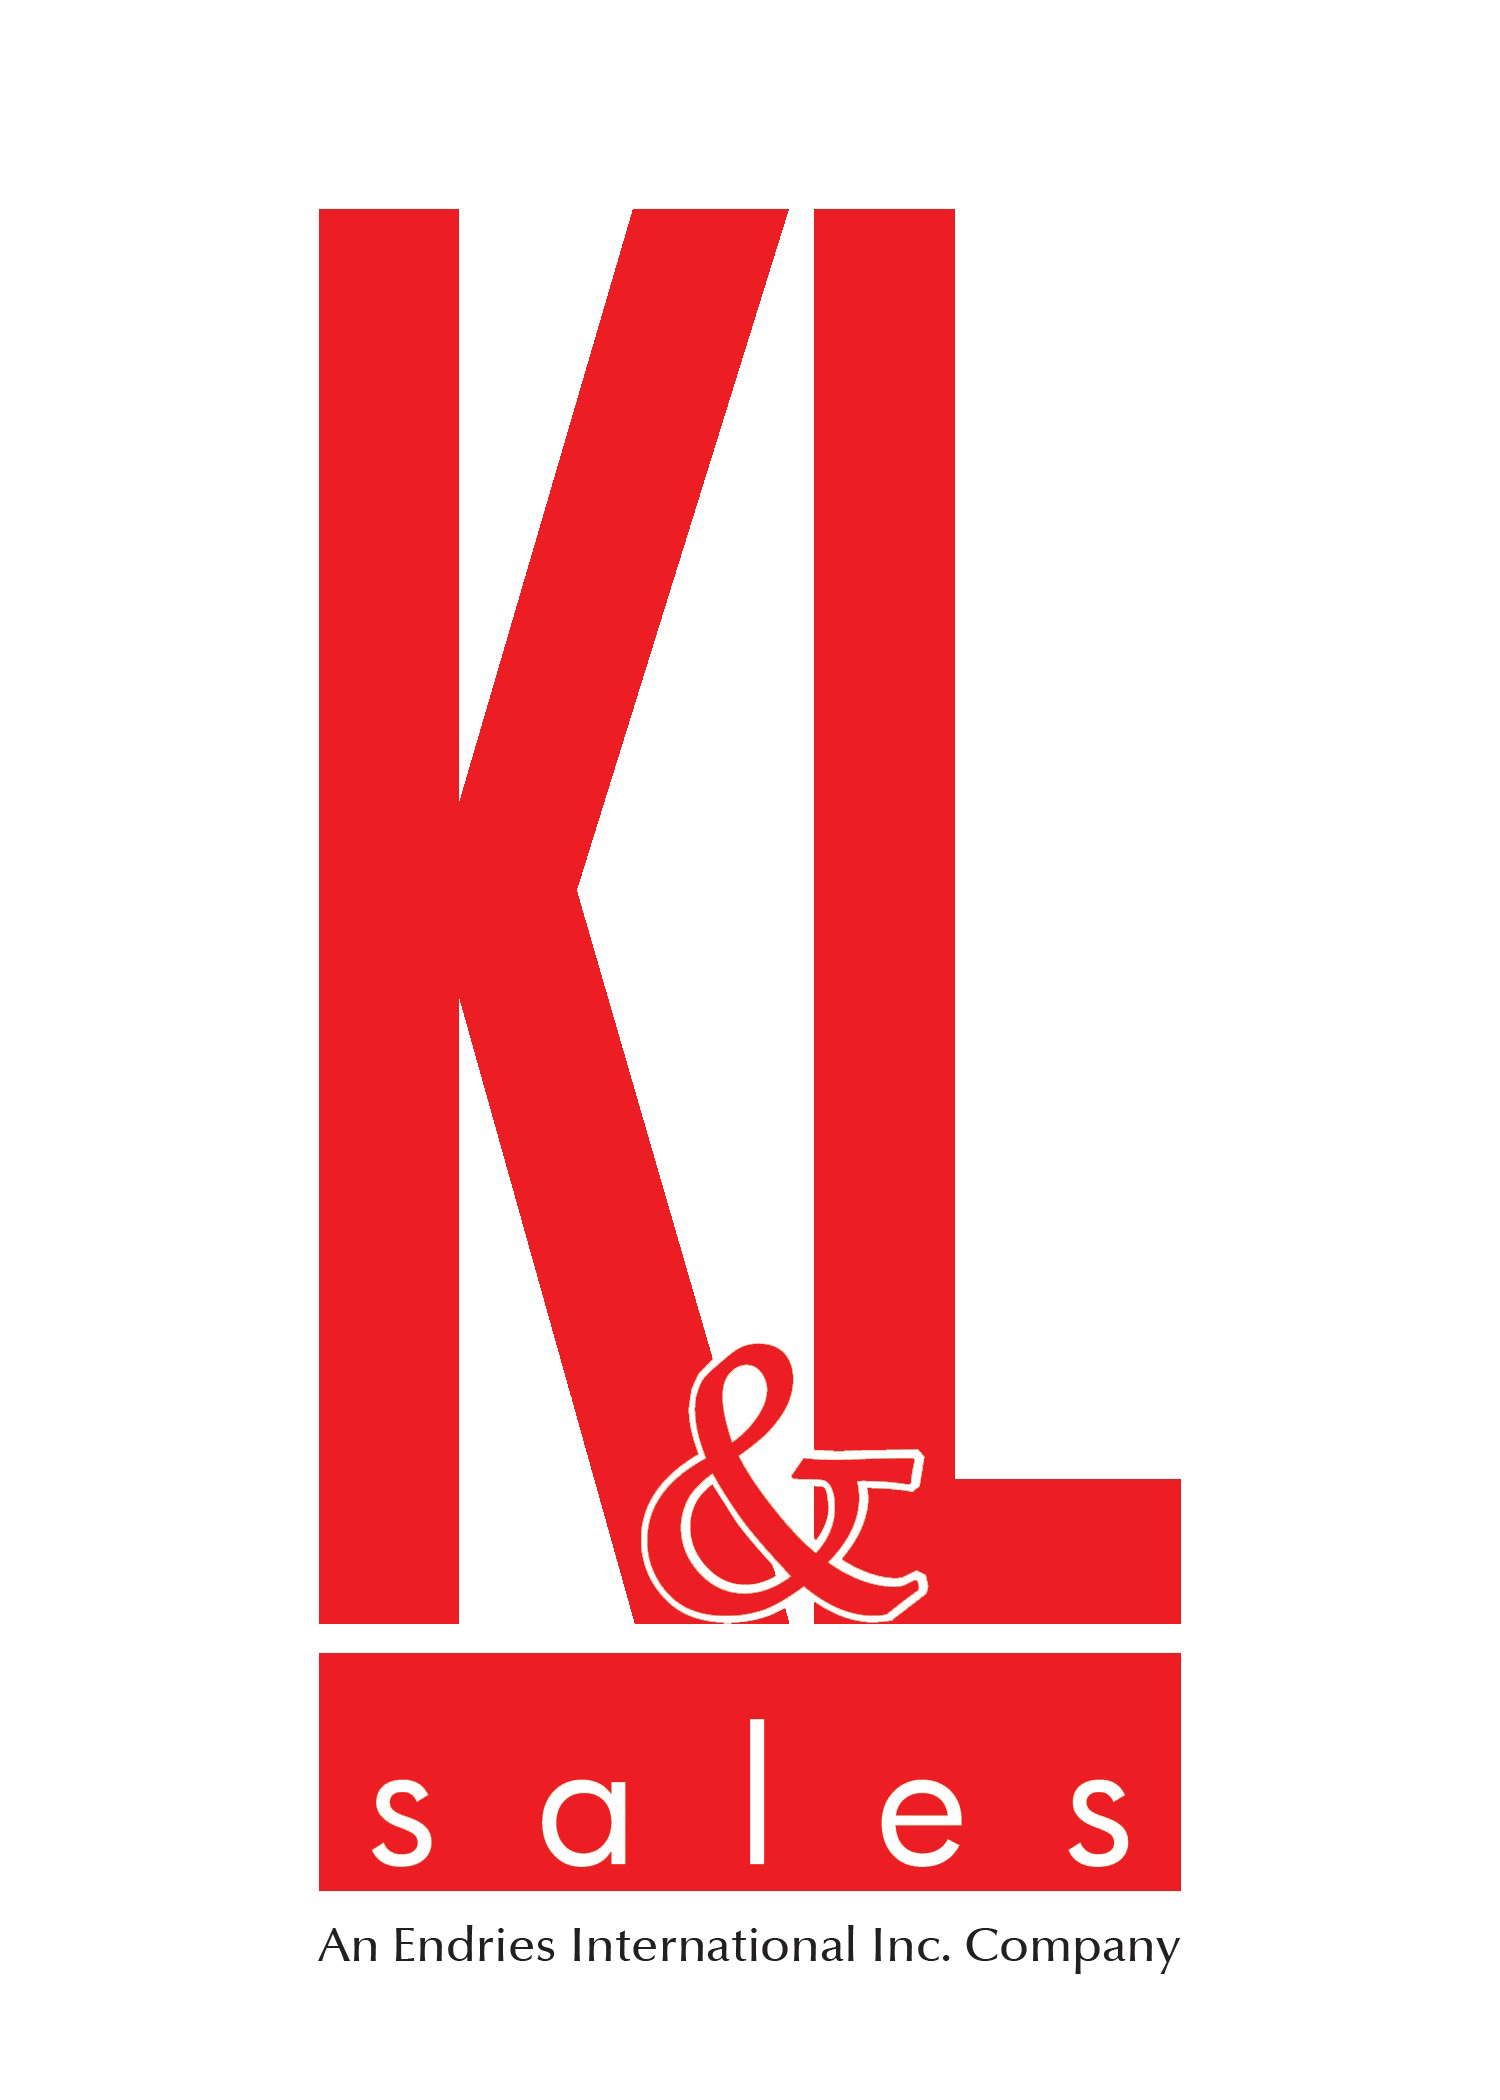 K&L Sales  was acquired by Endries in 2020